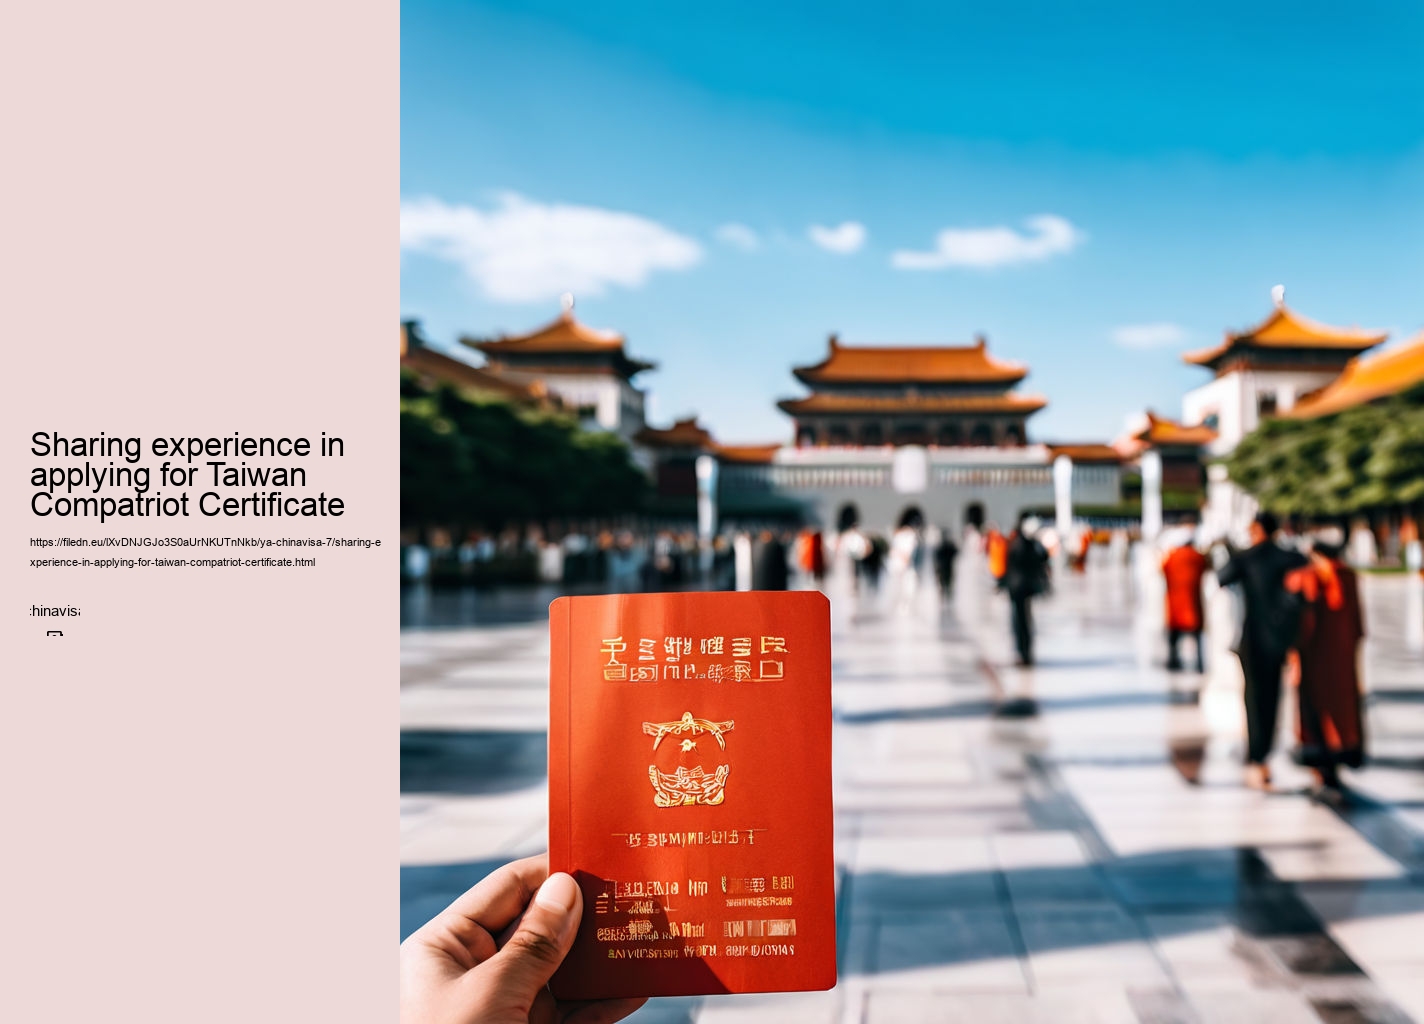 Sharing experience in applying for Taiwan Compatriot Certificate